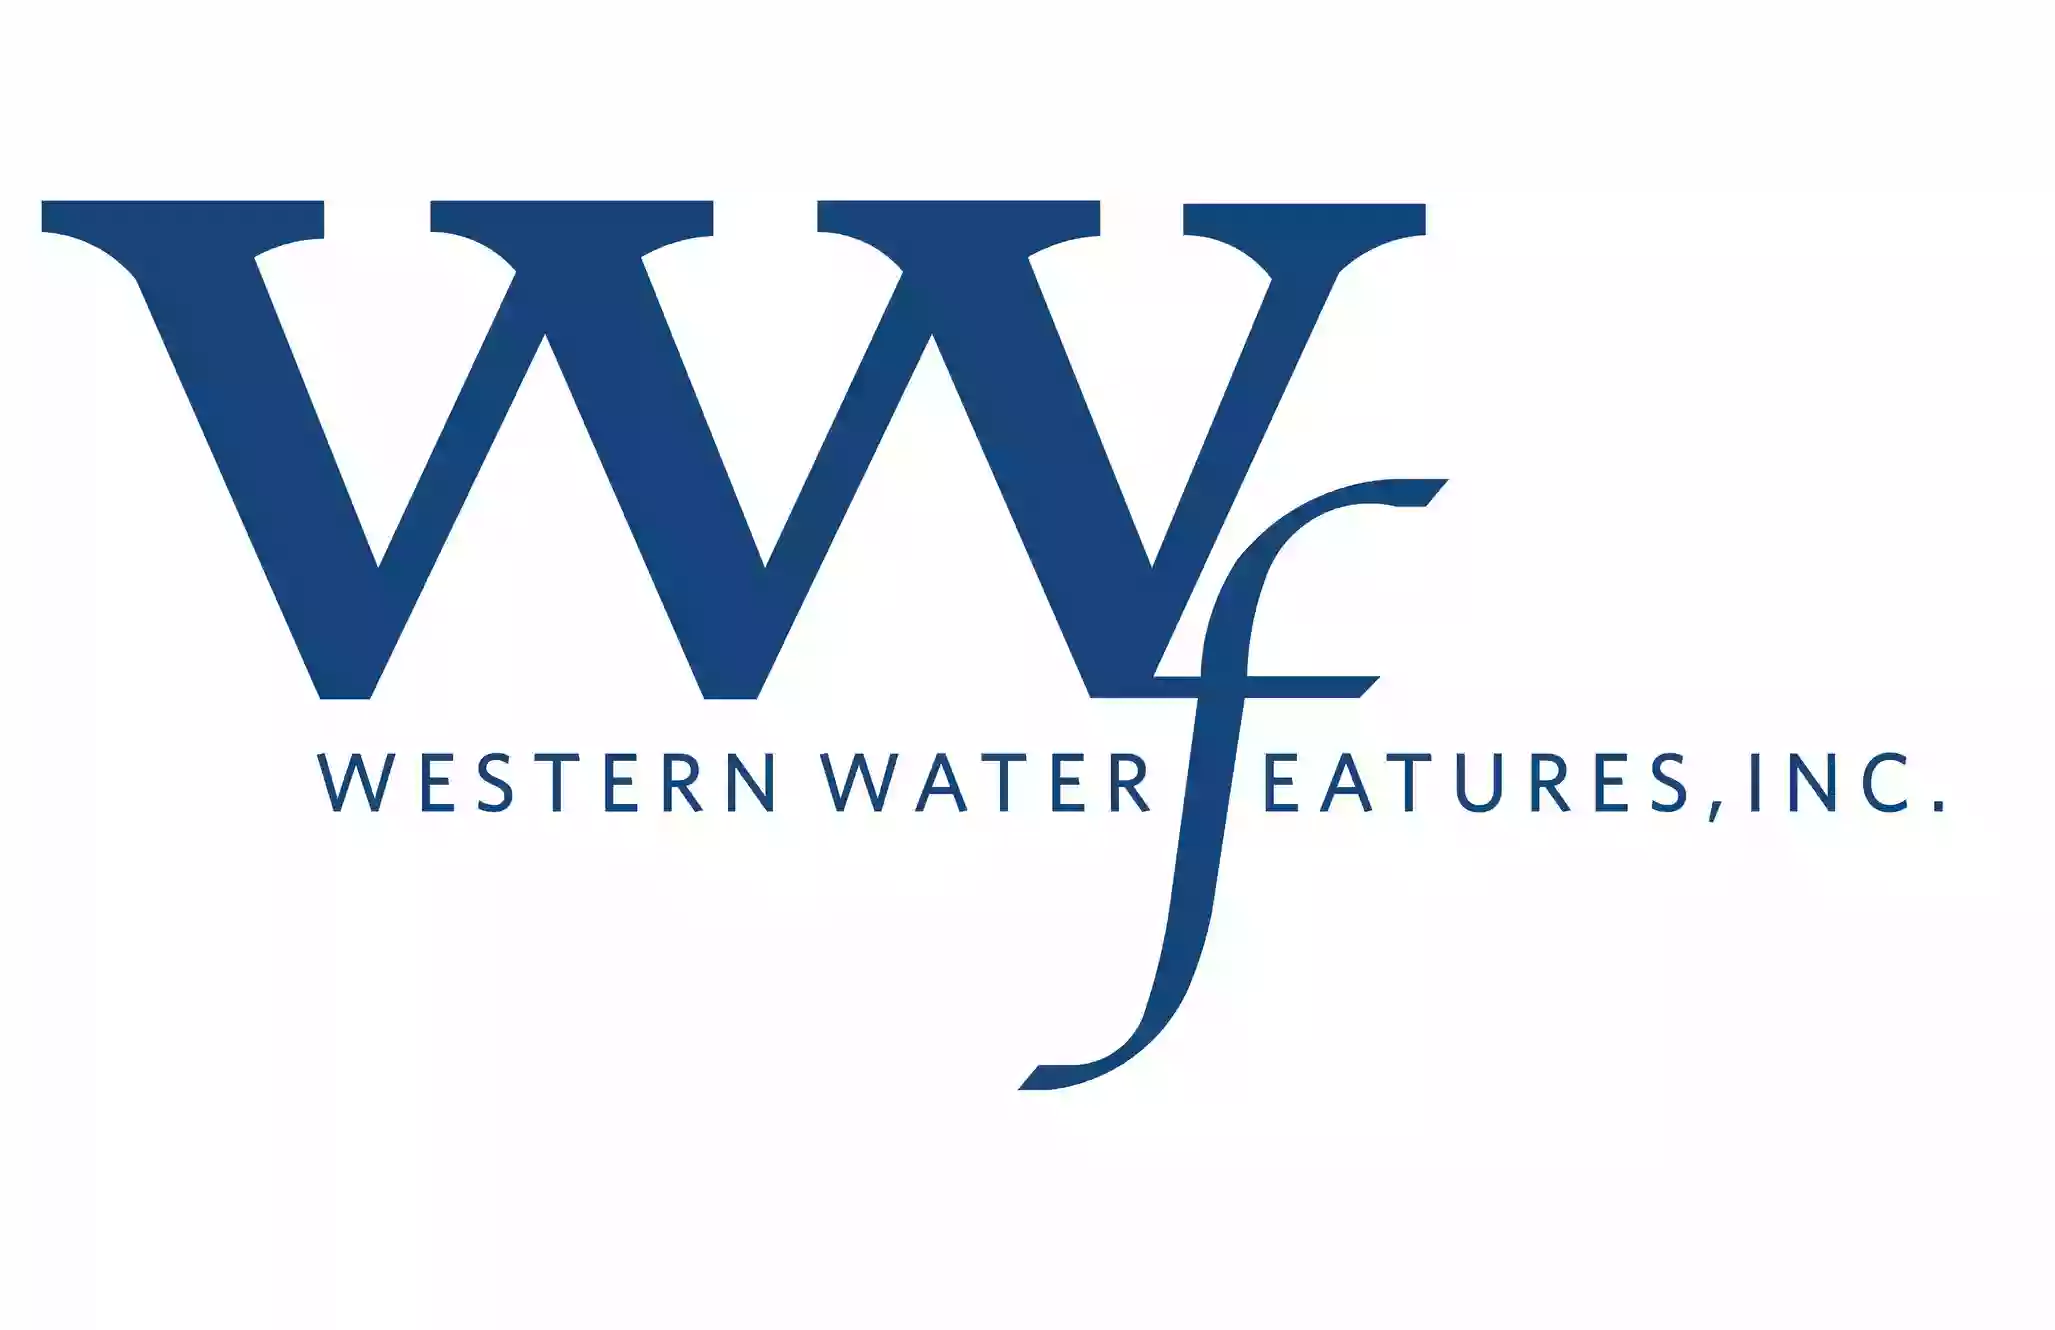 Western Water Features